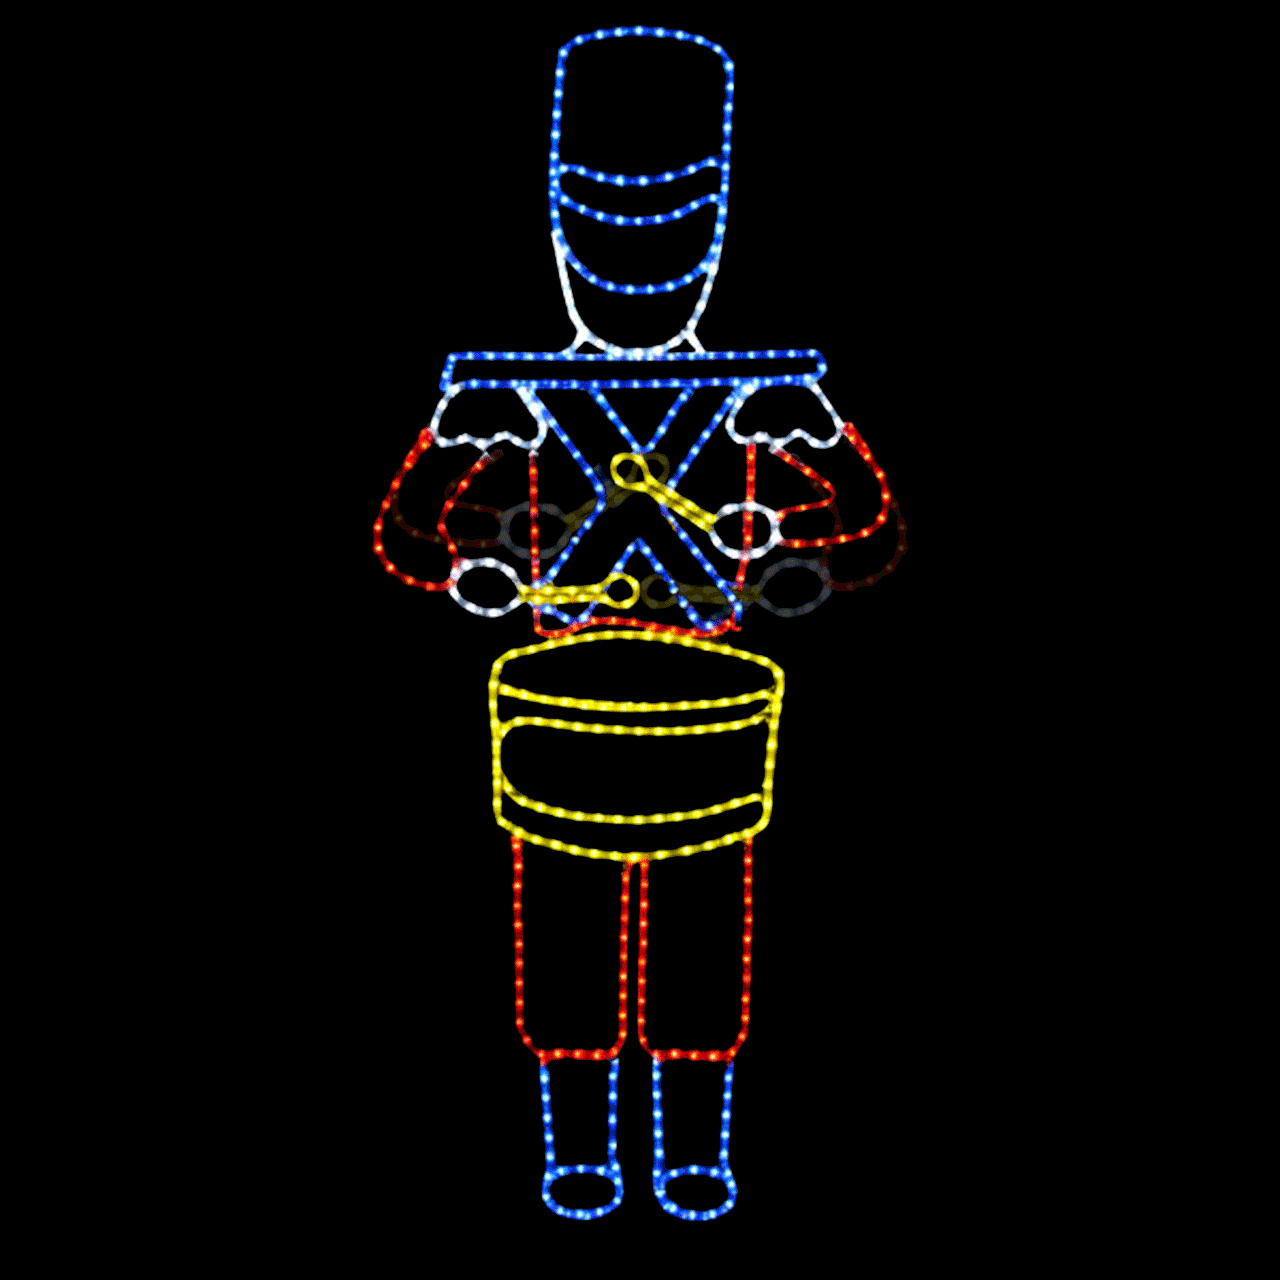 Animated Drumming Toy Soldier Motif